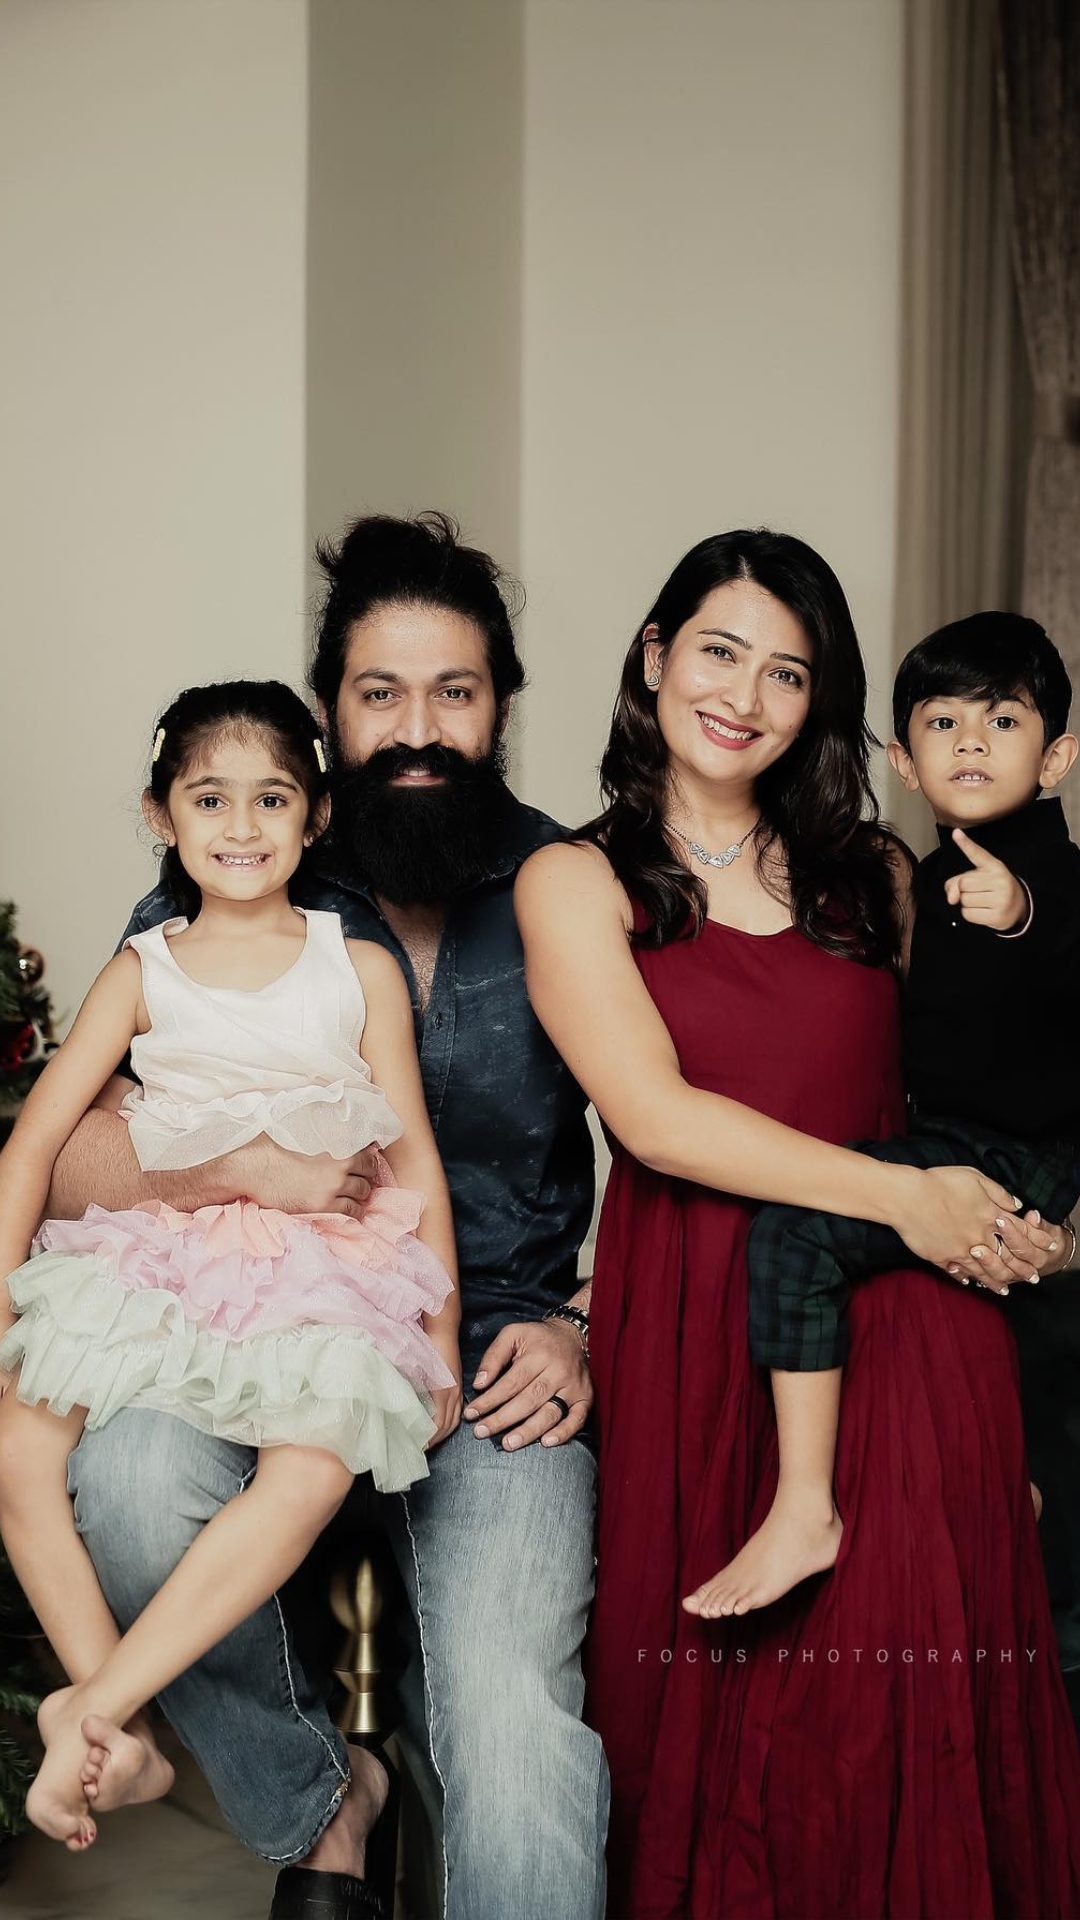 Yash purchases candies for wife Radhika Pandit and daughter from a local grocery store, pics go viral